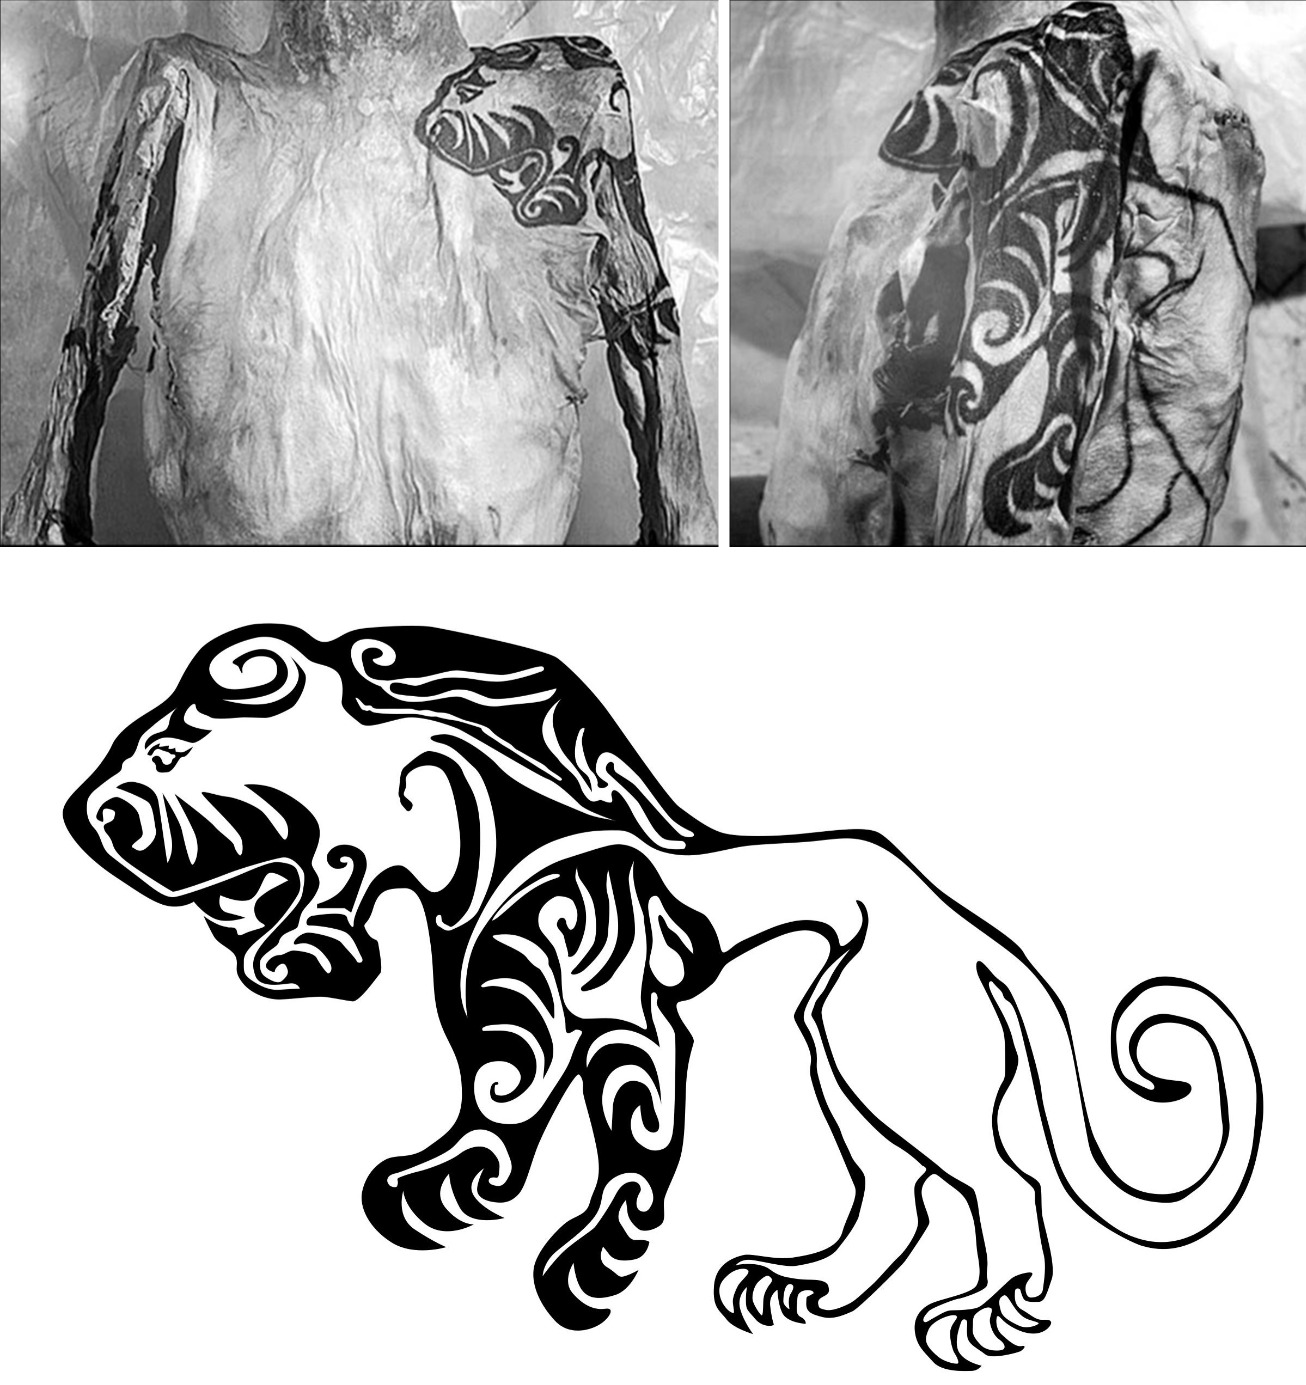 A tiger tattoo on the shoulder of a Scythian male mummy found in 1949 in the Altai Mountains of Siberia. 3rd century BCE, Russia.jpg